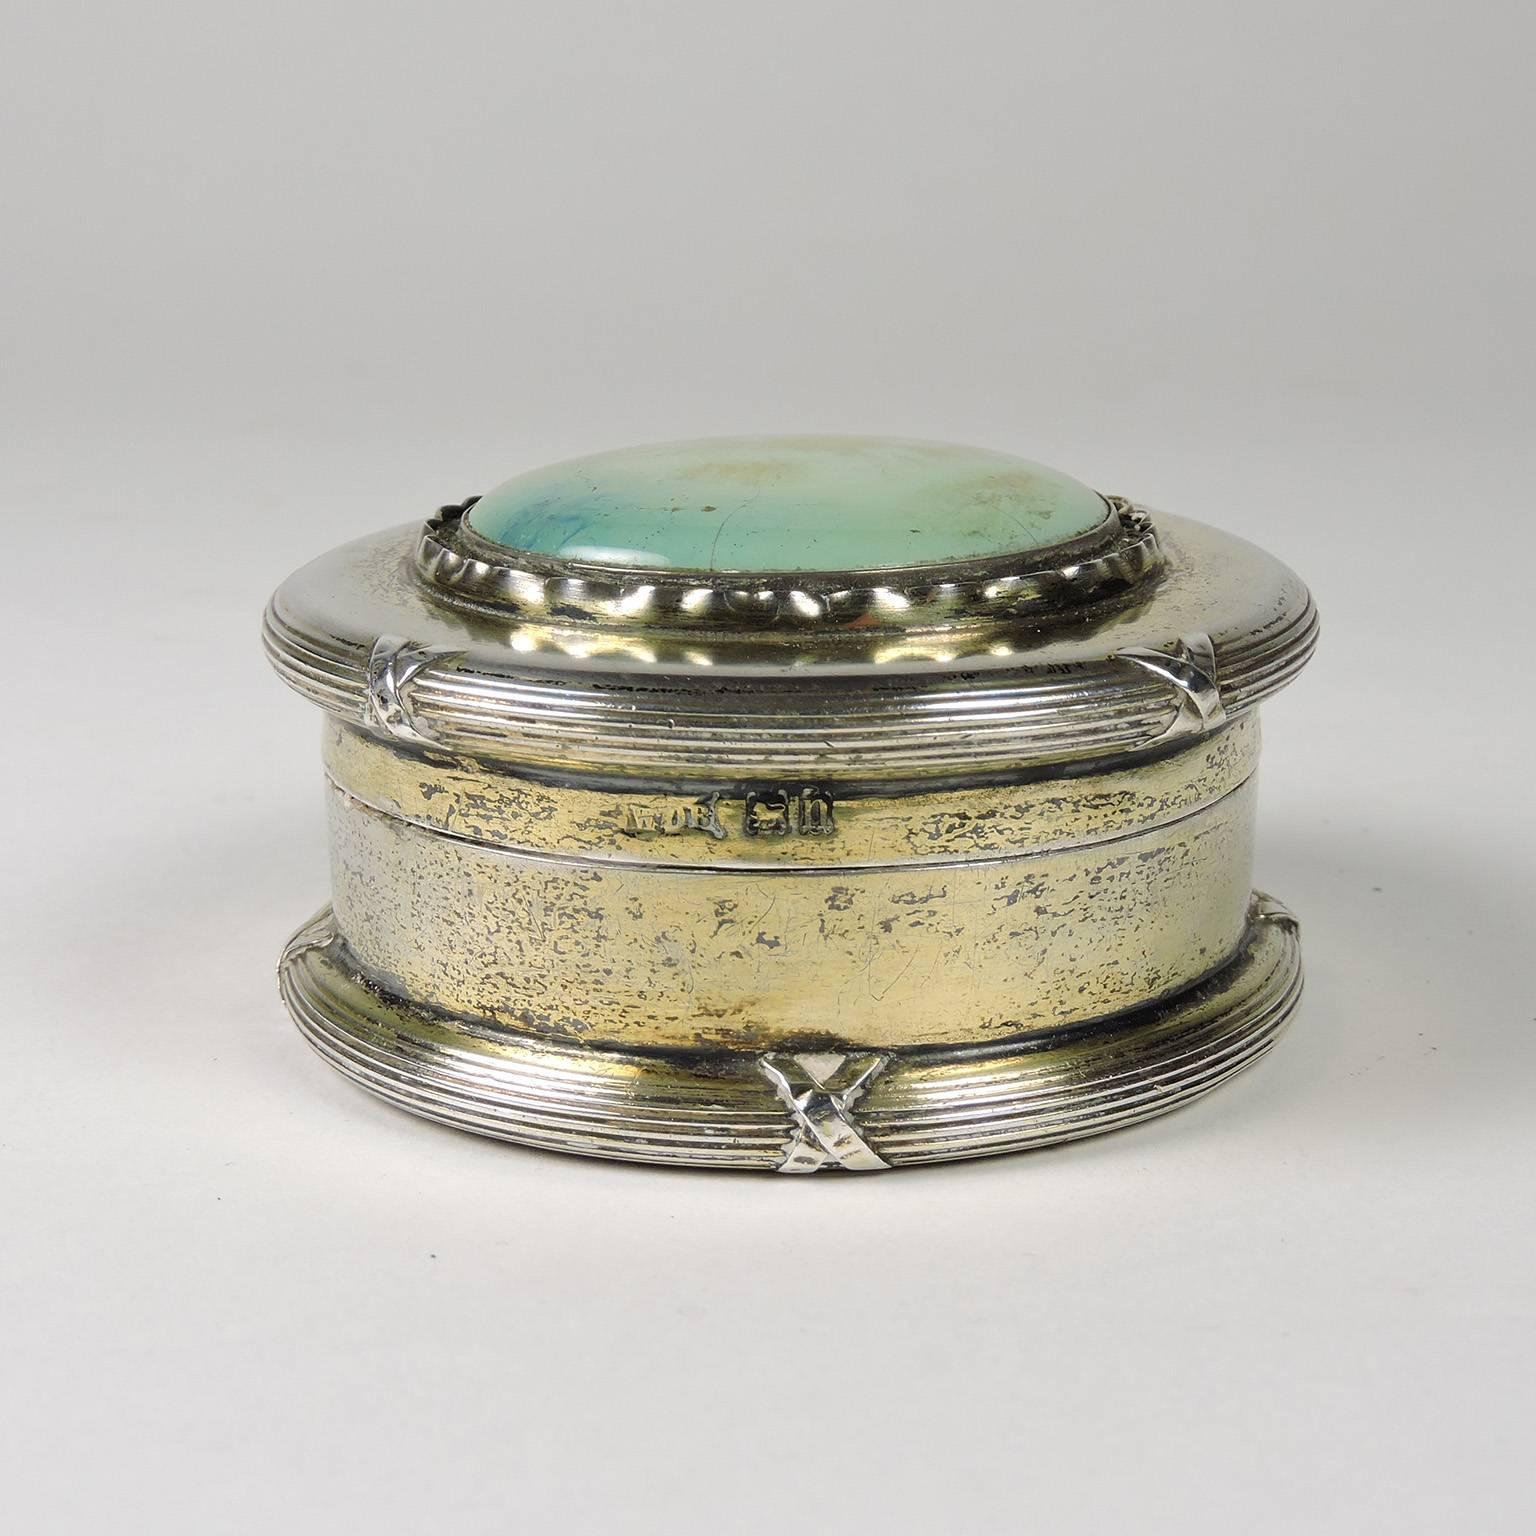 English Arts & Crafts period silver powder box with Persian turquoise medallion, William Disney Barlow, maker, Birmingham, circa 1912, bears lion passant mark and uncrowned lions head, WDB makers mark and date stamped N for 1912. Diameter: 3”,